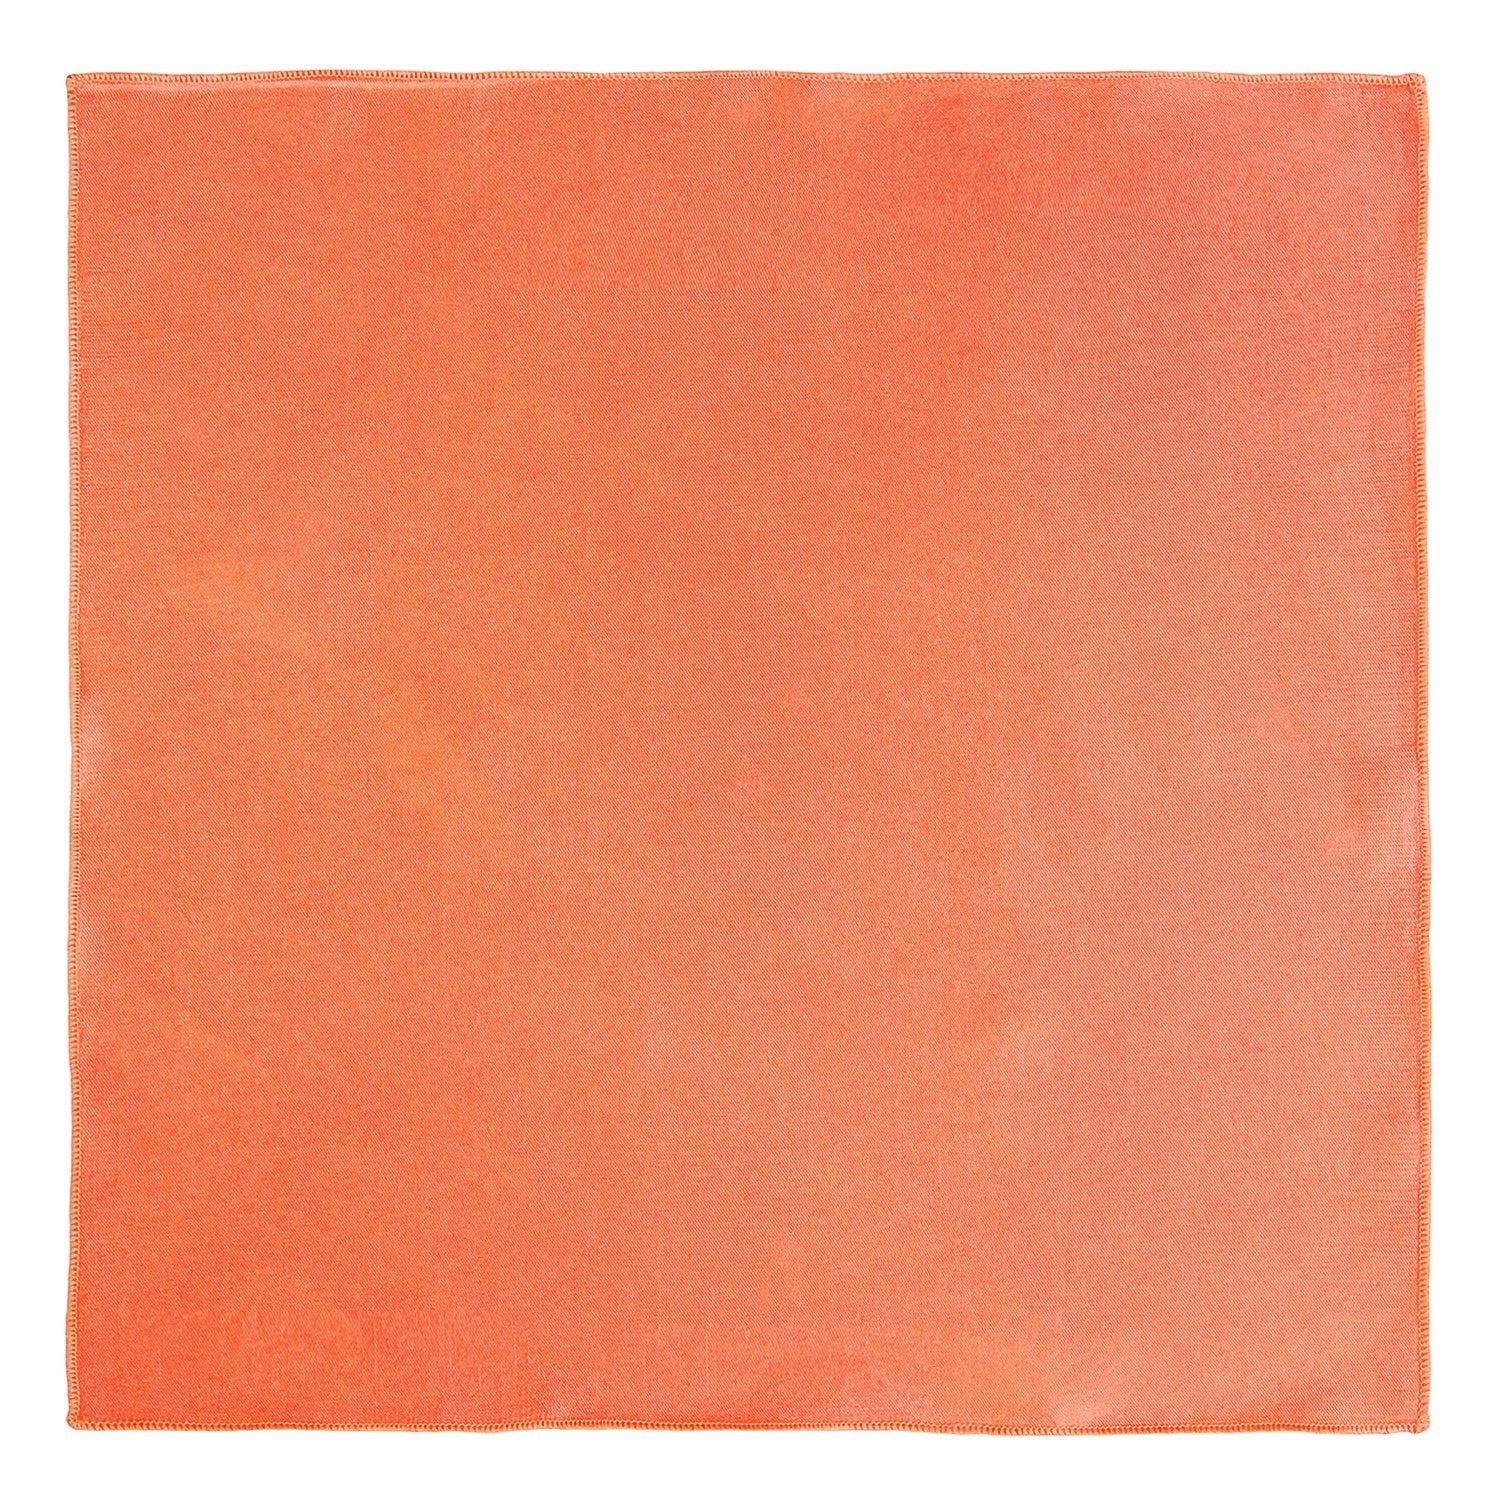 Chokore Apricot Colour Pure Silk Pocket Square, from the Solids Line